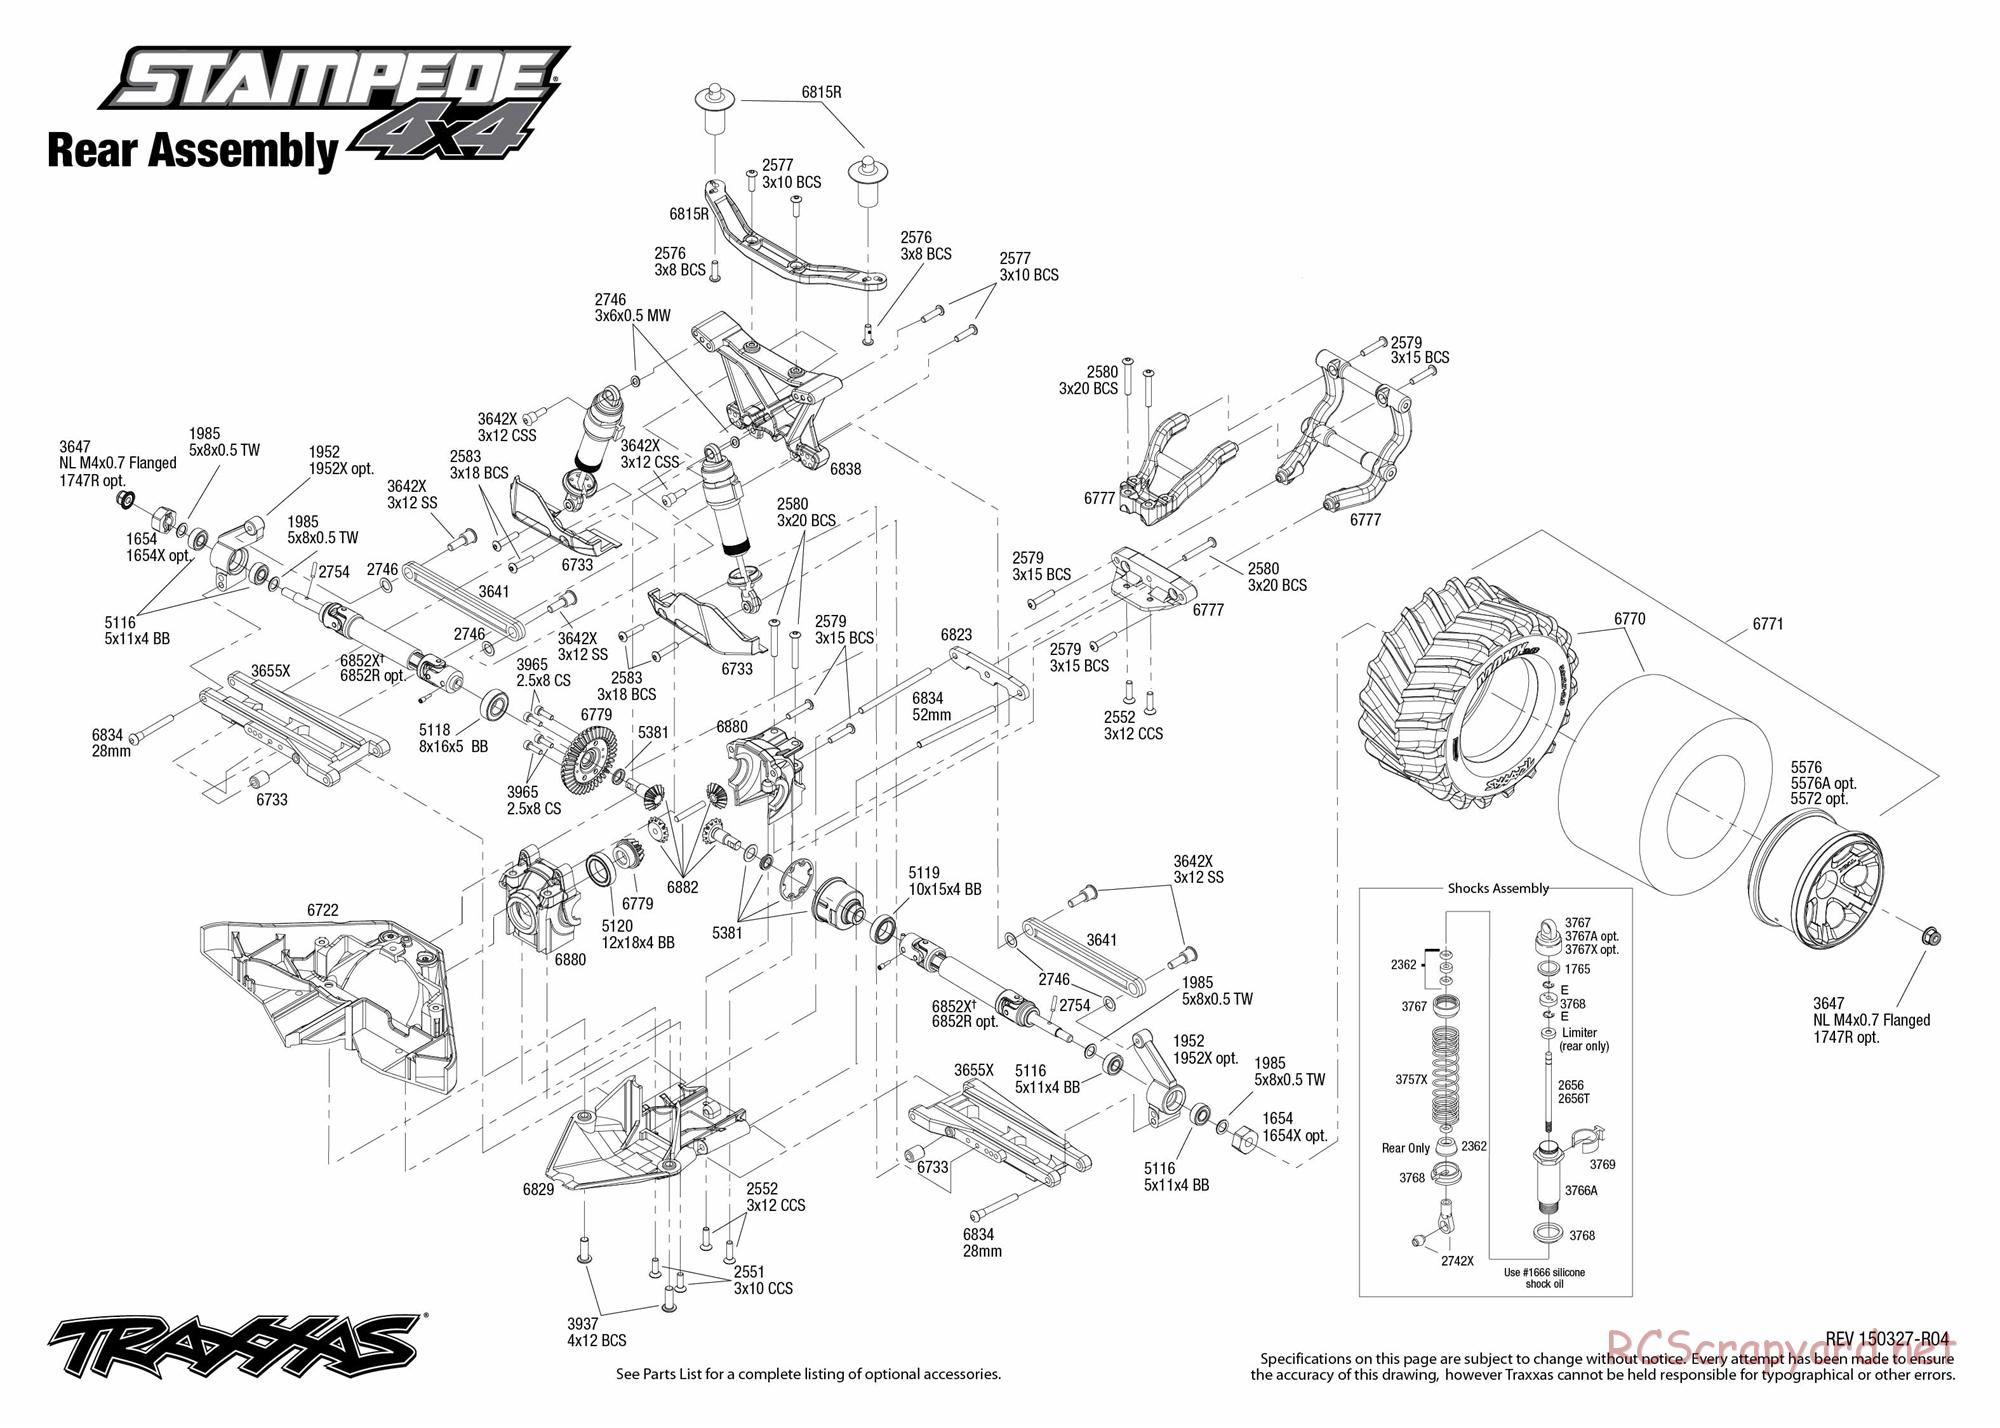 Traxxas - Stampede 4x4 (2013) - Exploded Views - Page 2